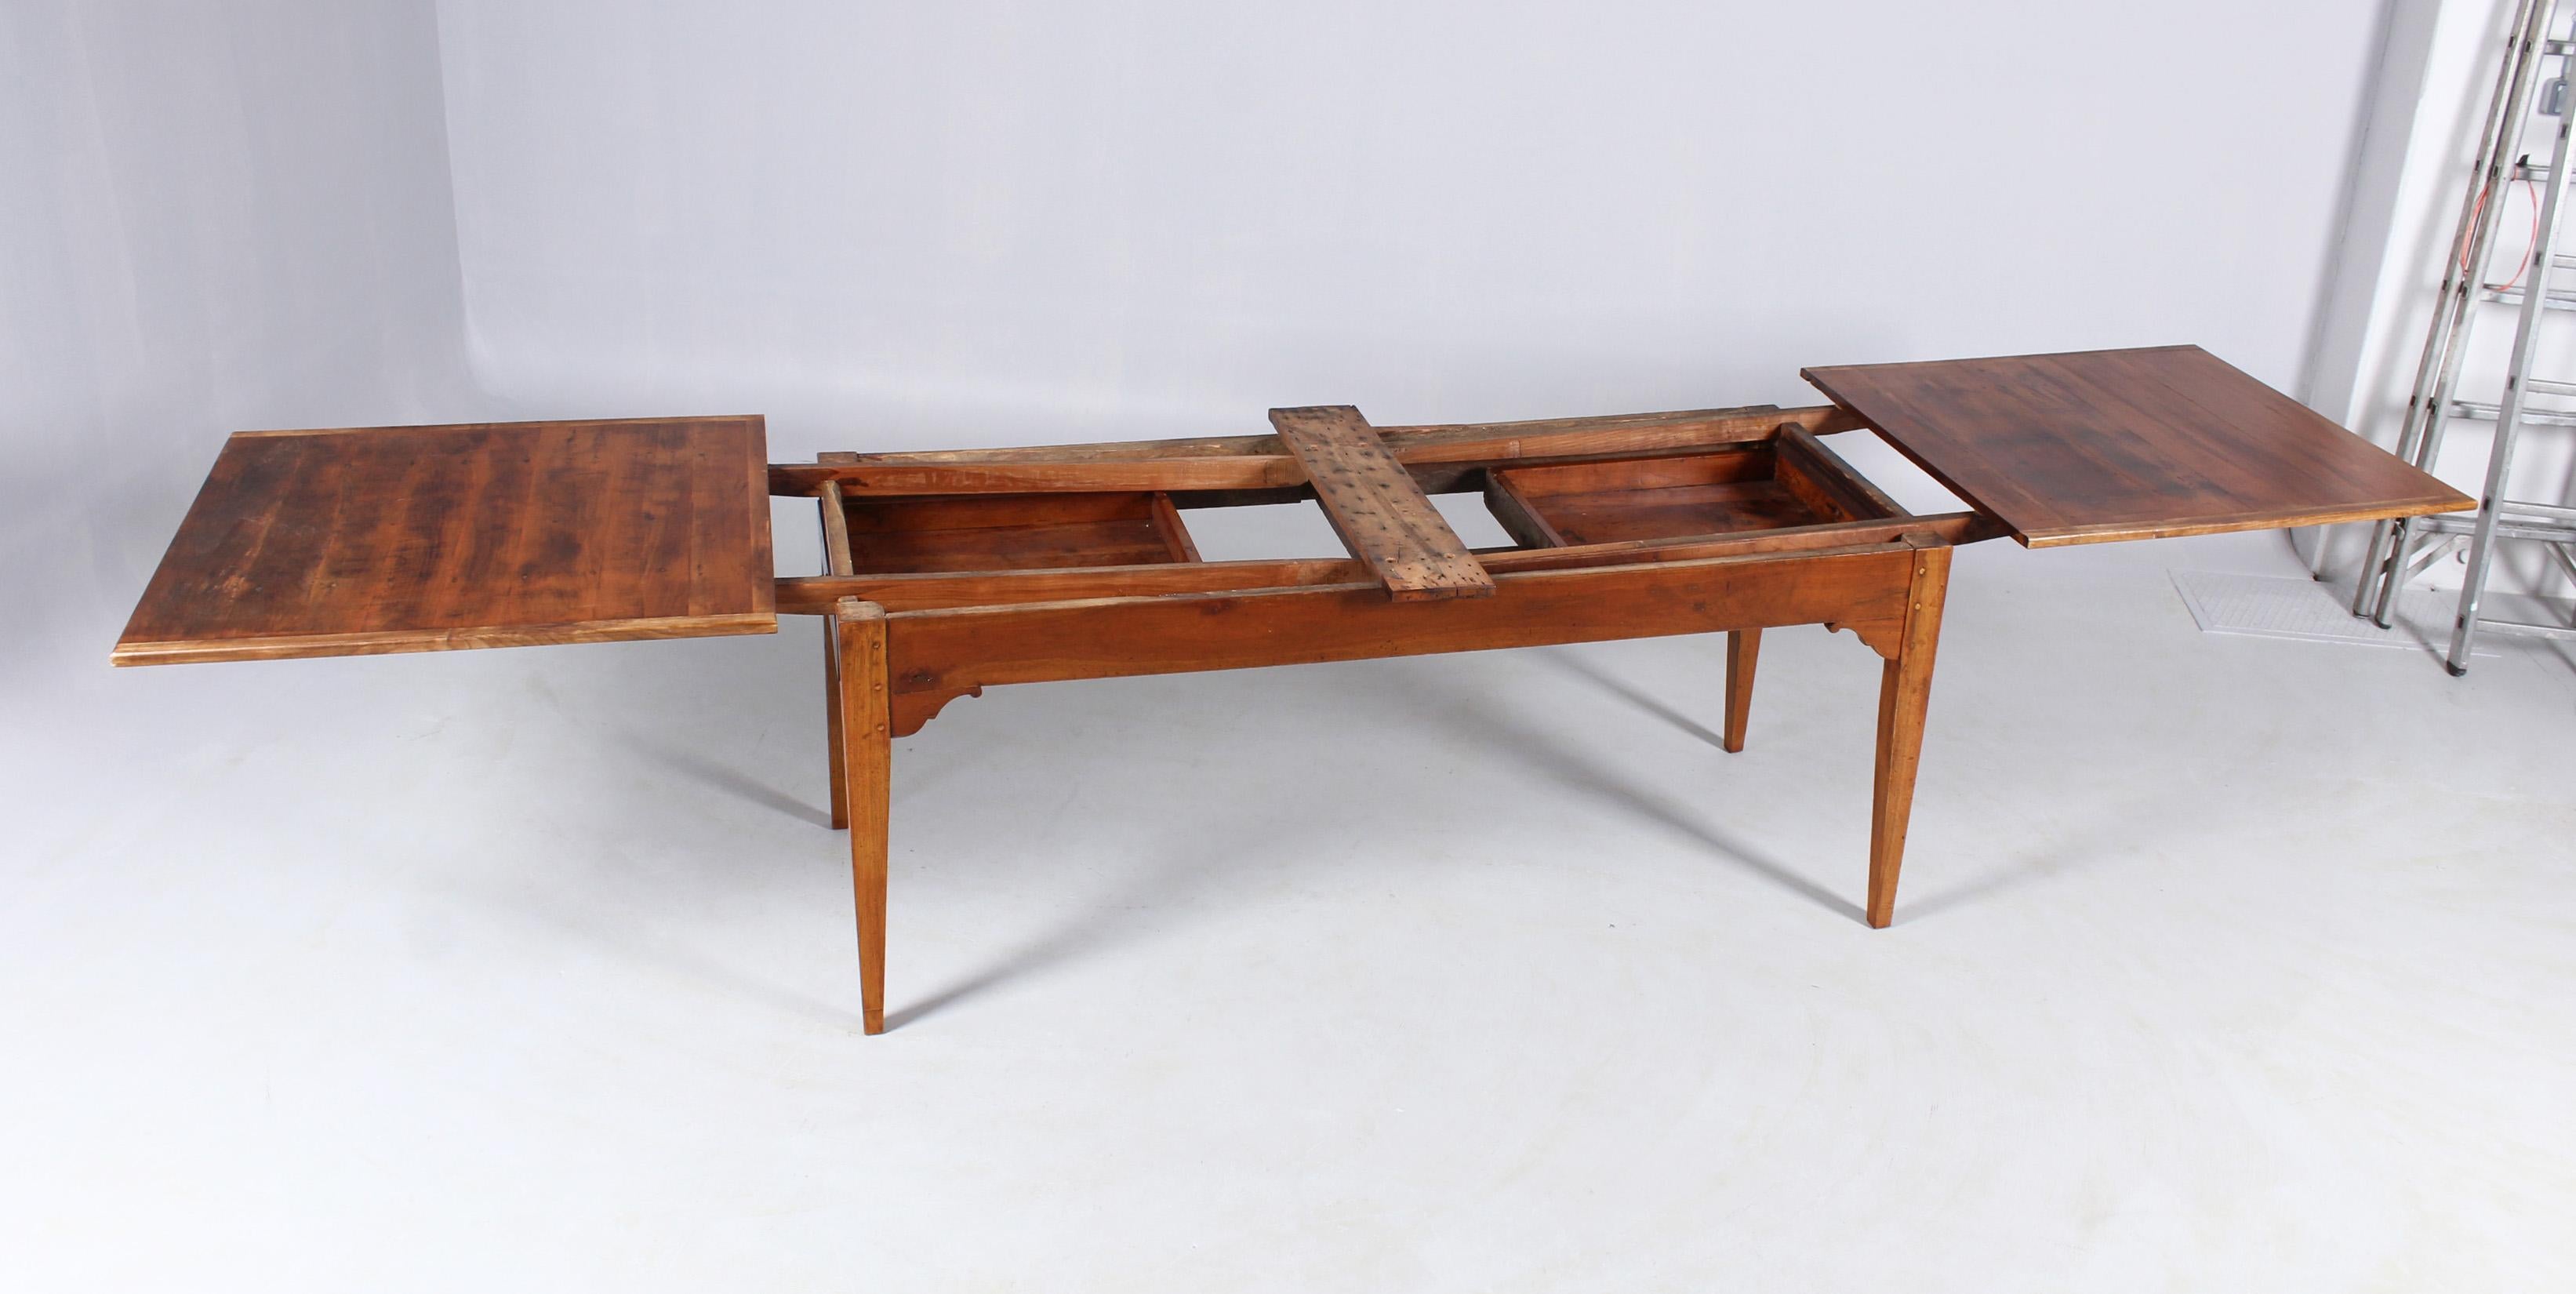 19th Century Extendable Farm Table, for up to 12 people, Cherrywood 15